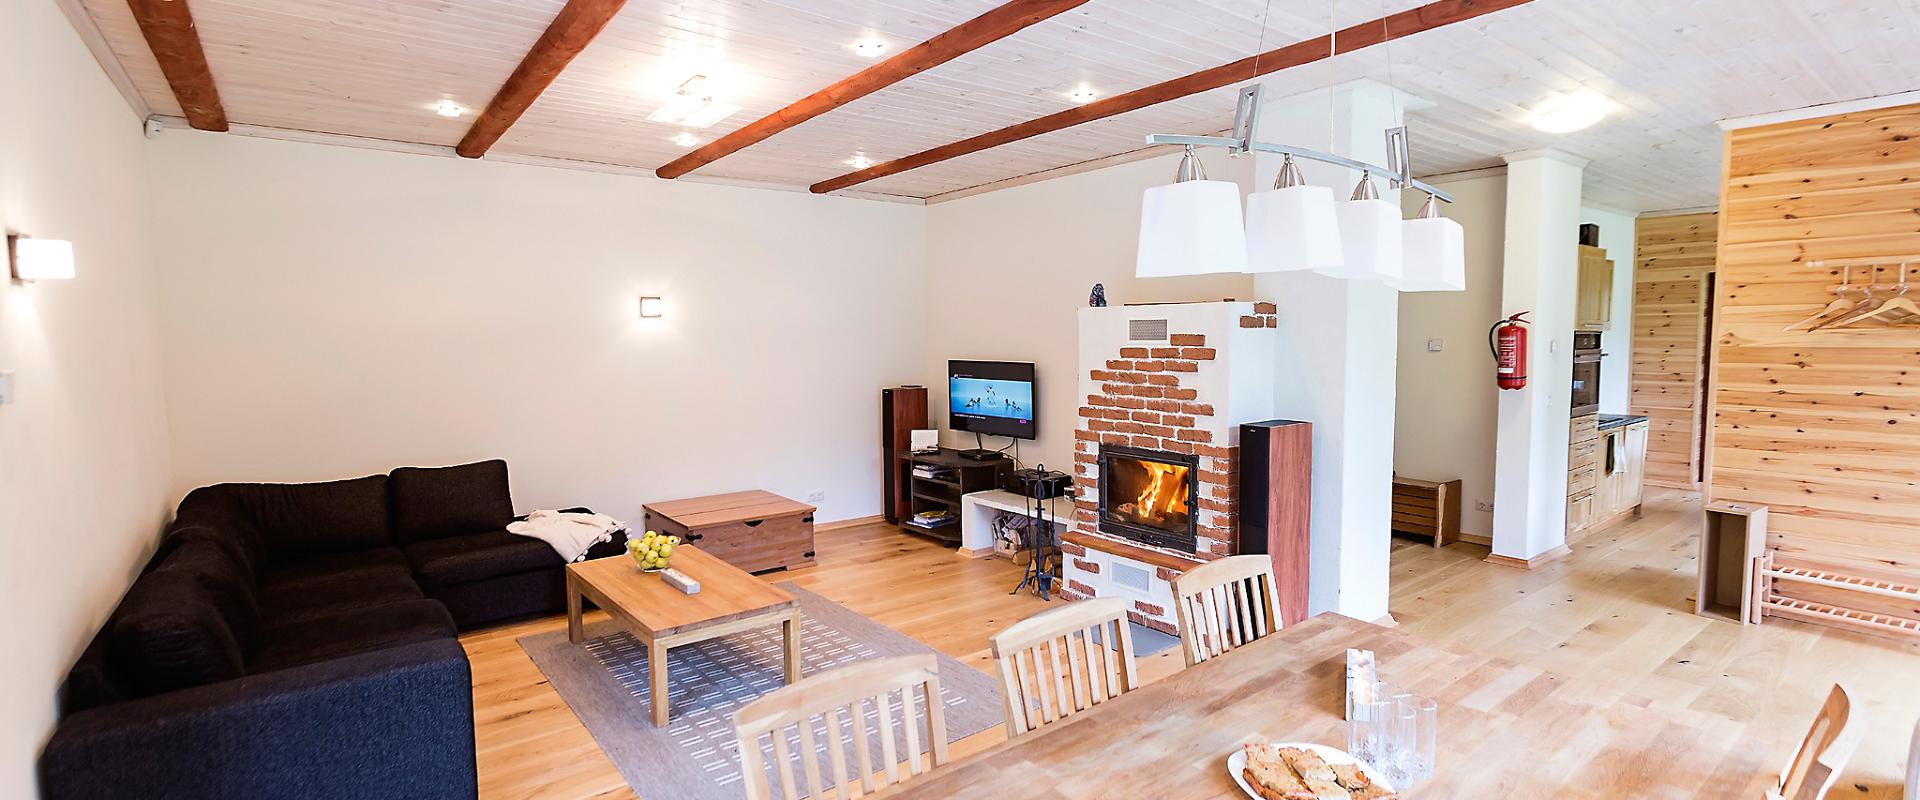 Õnneoru Holiday Home, offering complete privacy, is located in Kuusnõmme village in Western Saaremaa. A two-storey cottage with all conveniences, rese